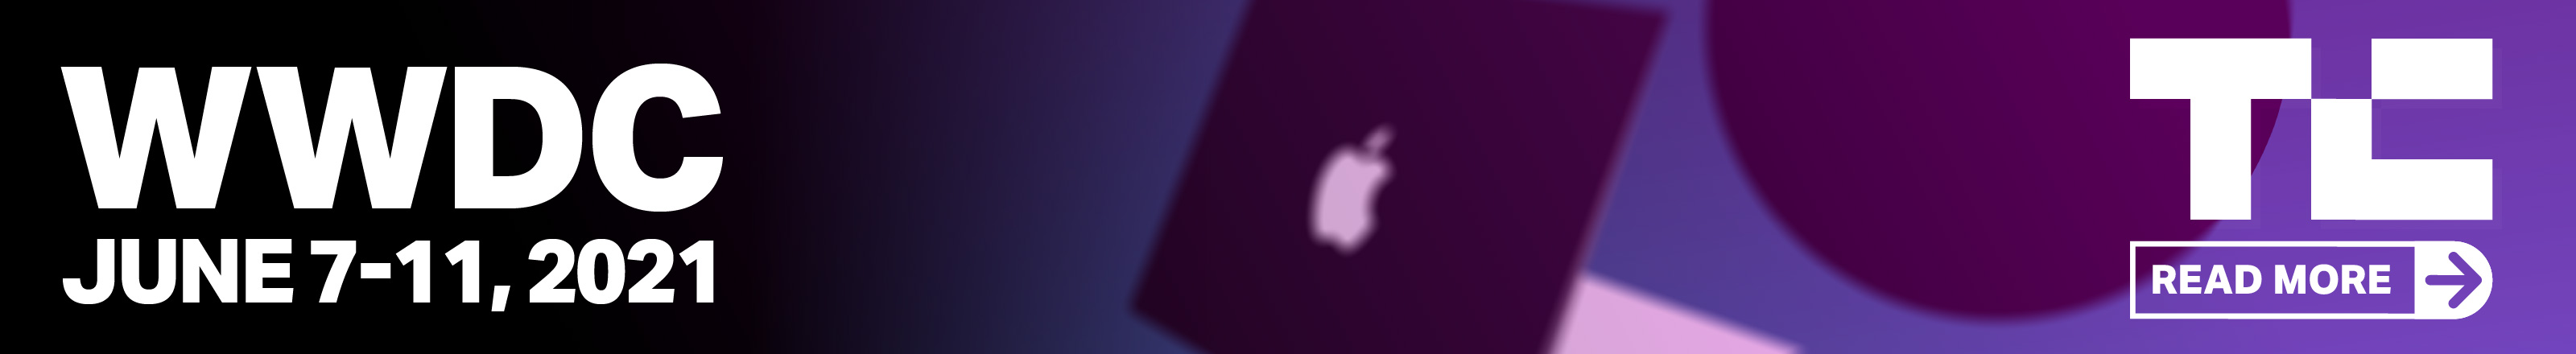 Read more about Apple's WWDC 2021 at TechCrunch